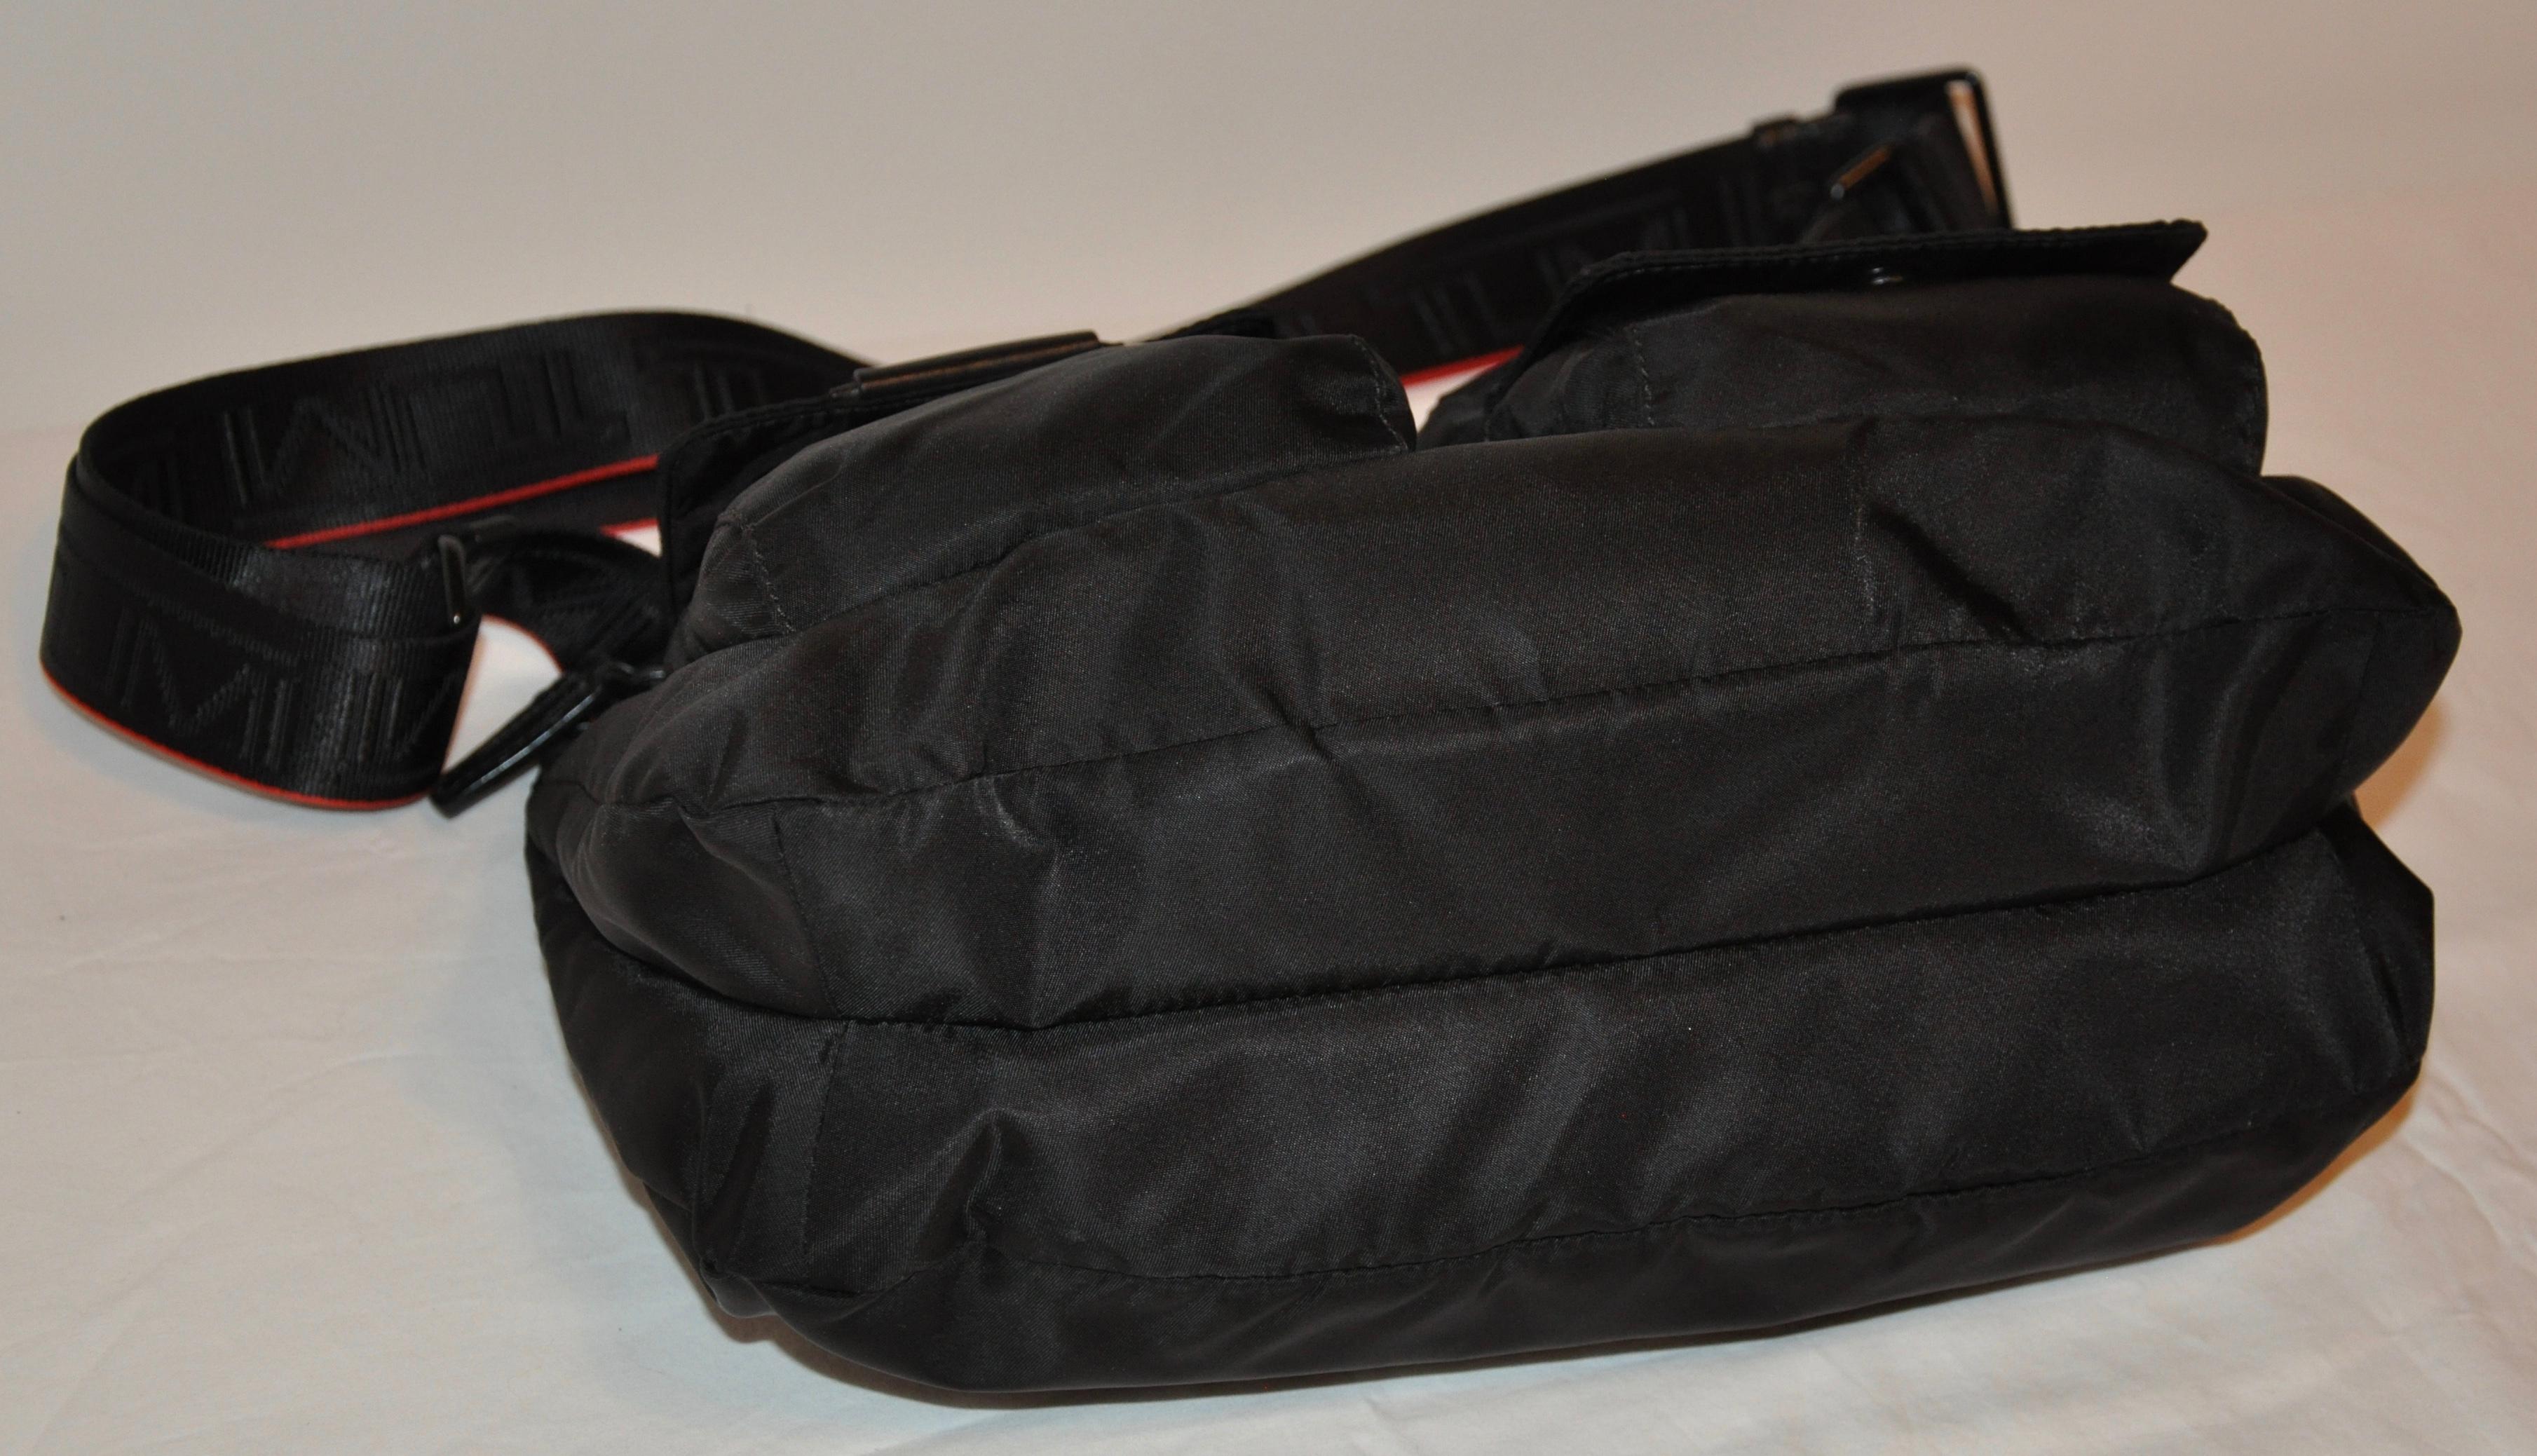 Tumi Zippered Top Crossbody Shoulder Bag with 4 Exterior Compartments In Good Condition For Sale In New York, NY